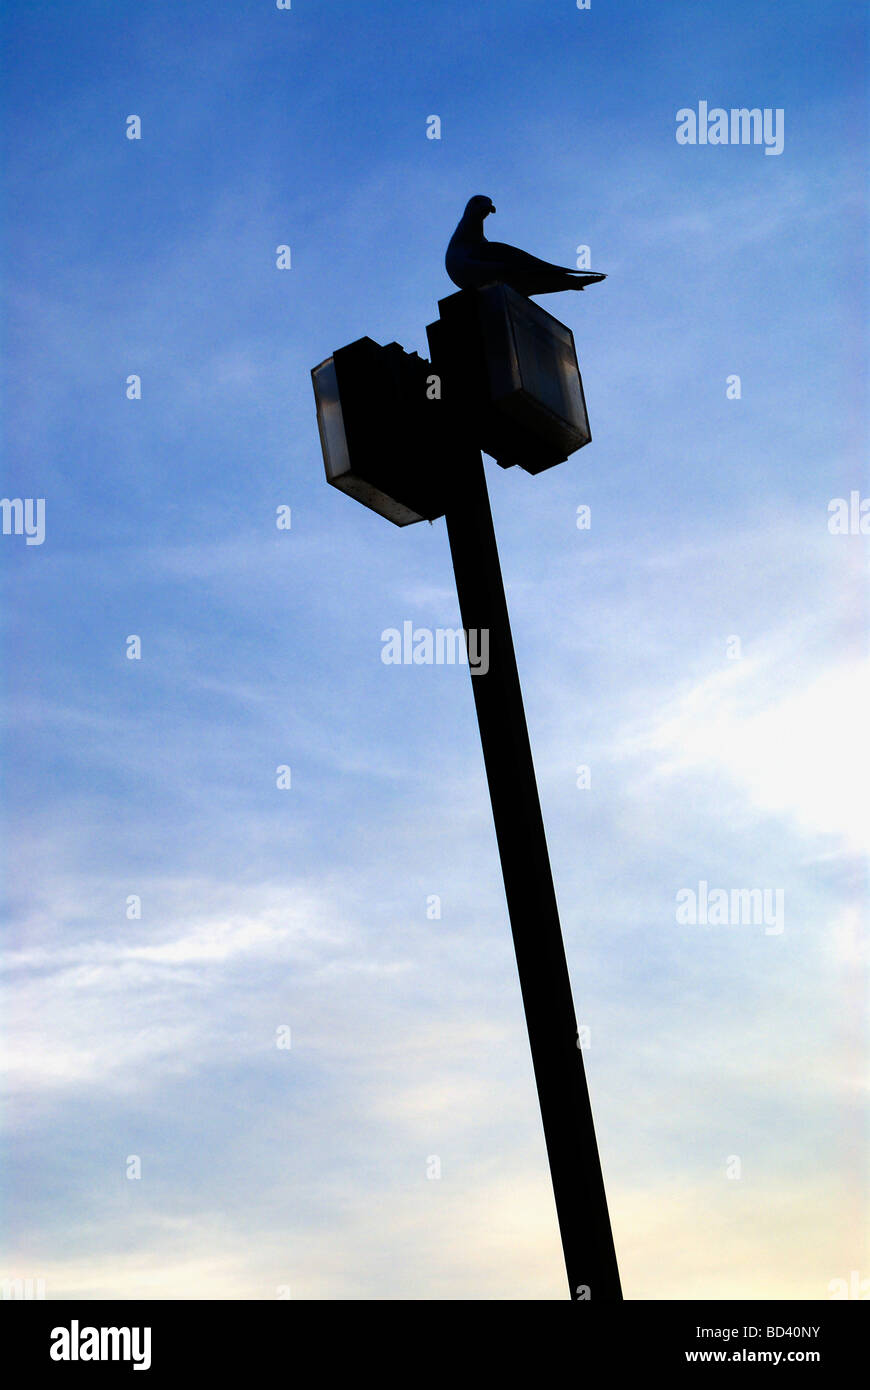 seagull silhouetted against blue sky Stock Photo